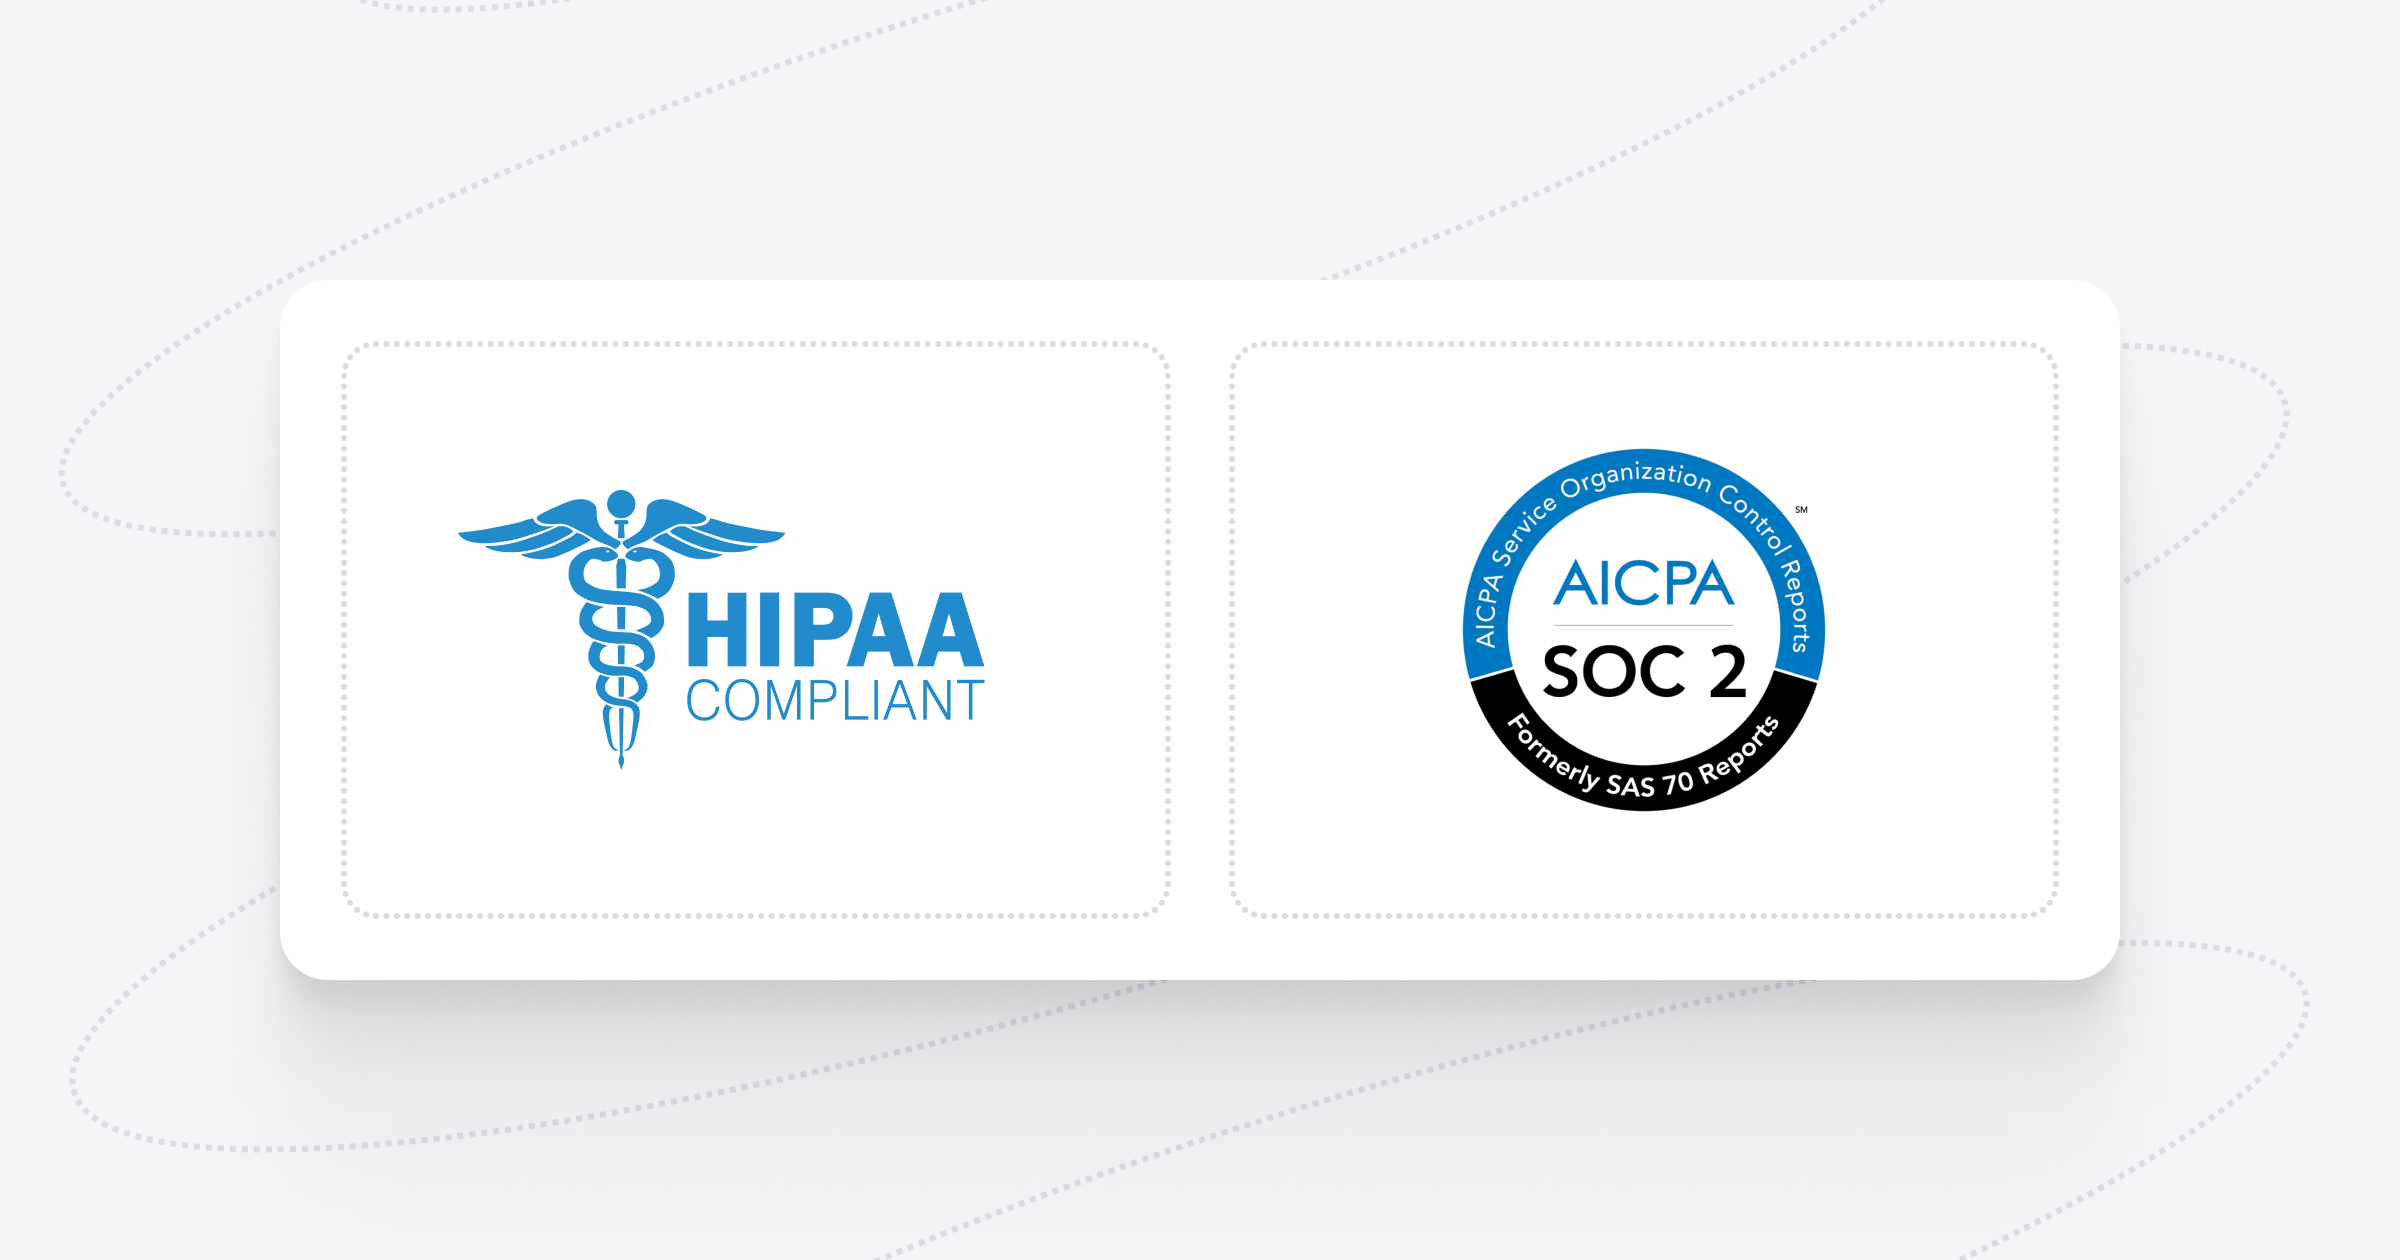 Announcing HIPAA and SOC 2 compliance